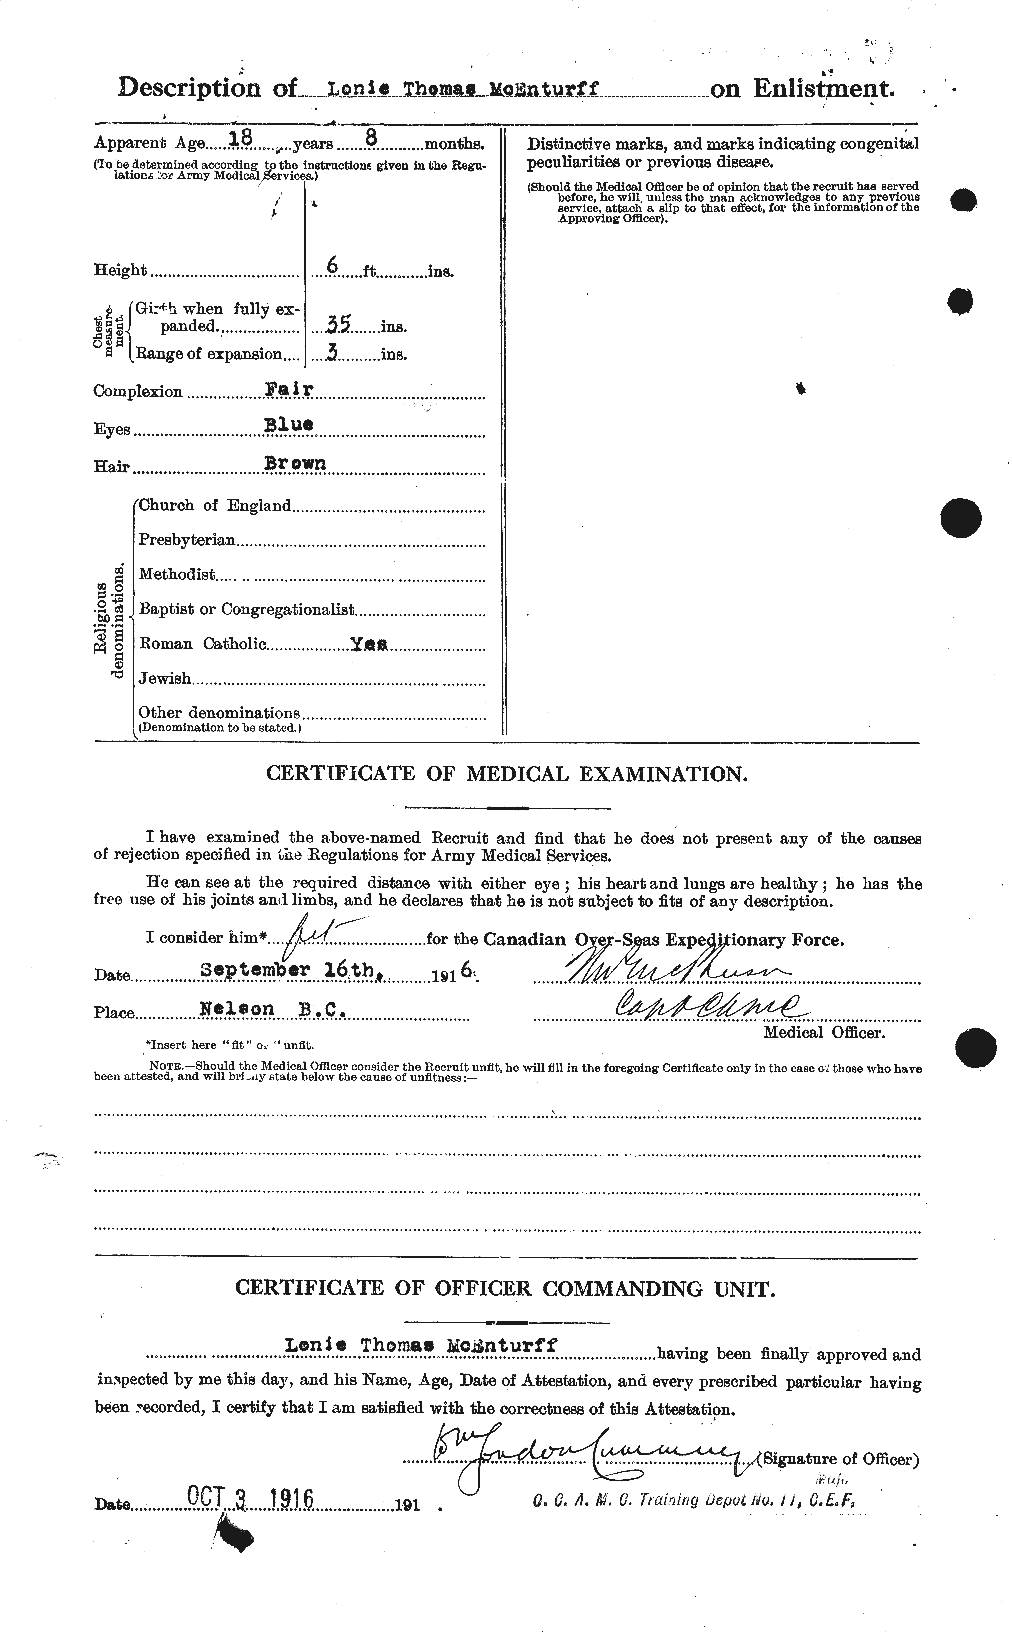 Personnel Records of the First World War - CEF 522152b